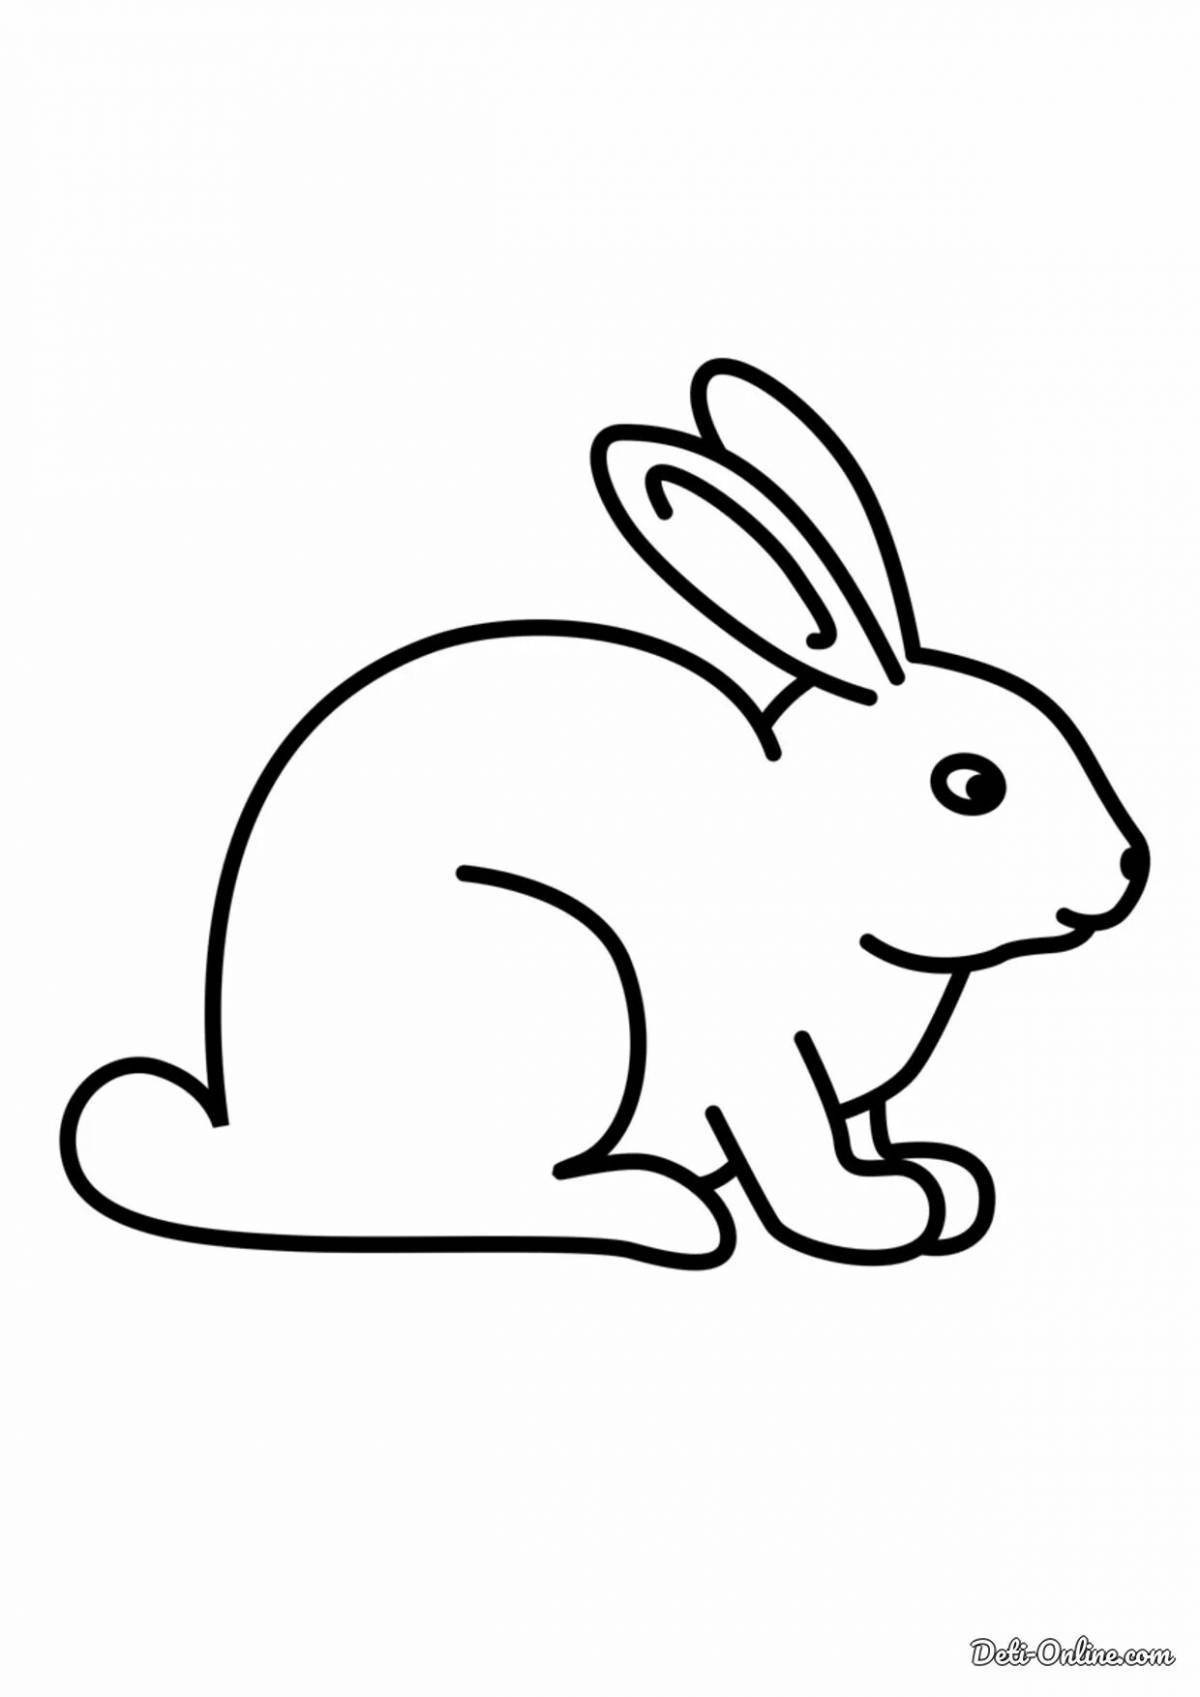 Friendly bunny drawing for kids